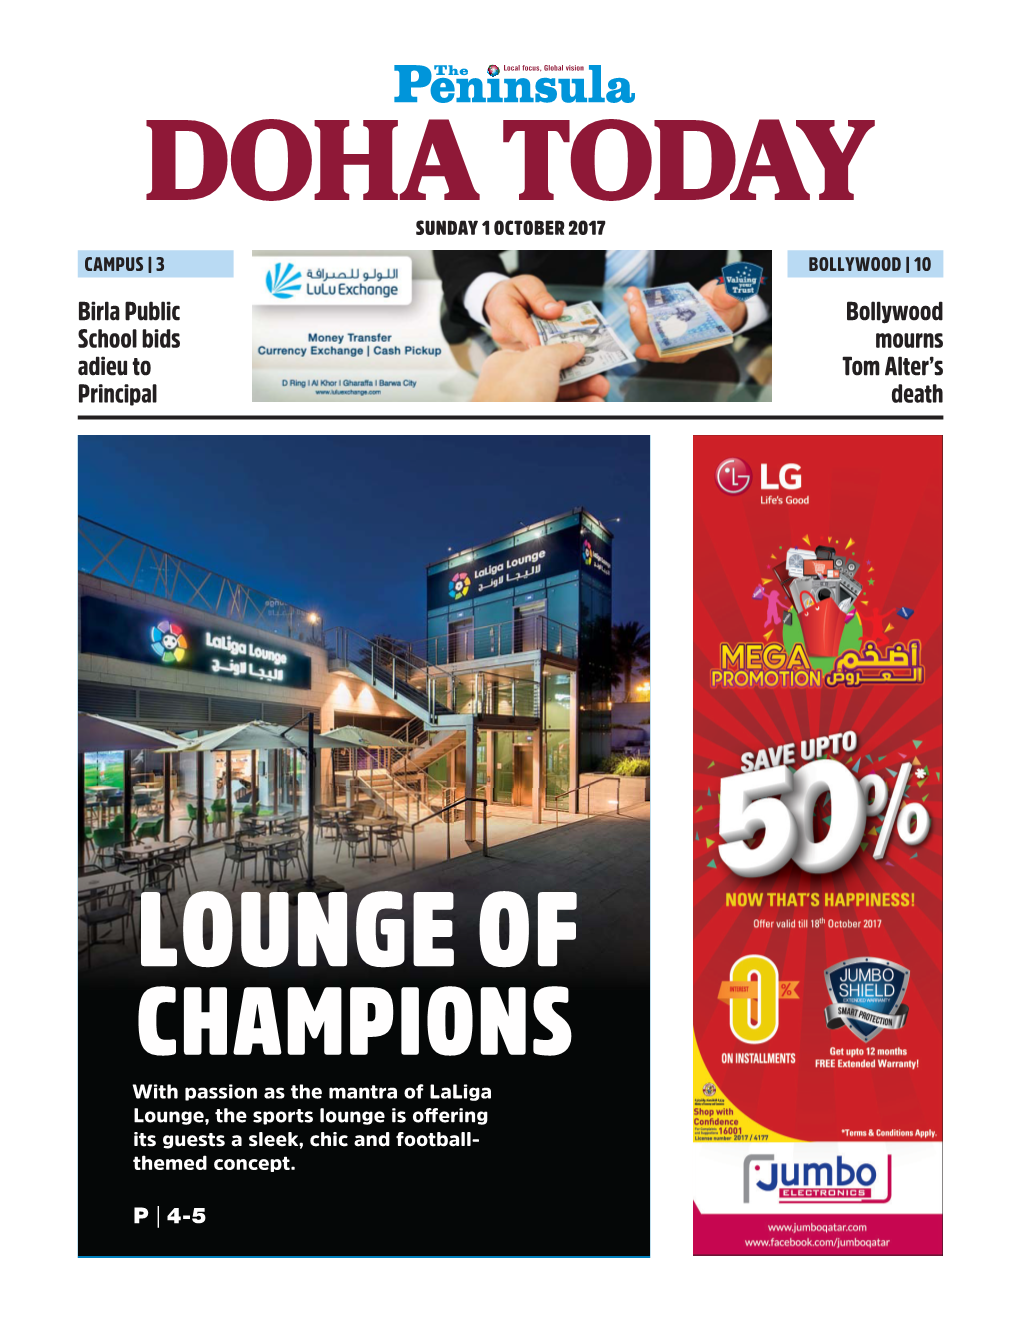 LOUNGE of CHAMPIONS with Passion As the Mantra of Laliga Lounge, the Sports Lounge Is Offering Its Guests a Sleek, Chic and Football- Themed Concept